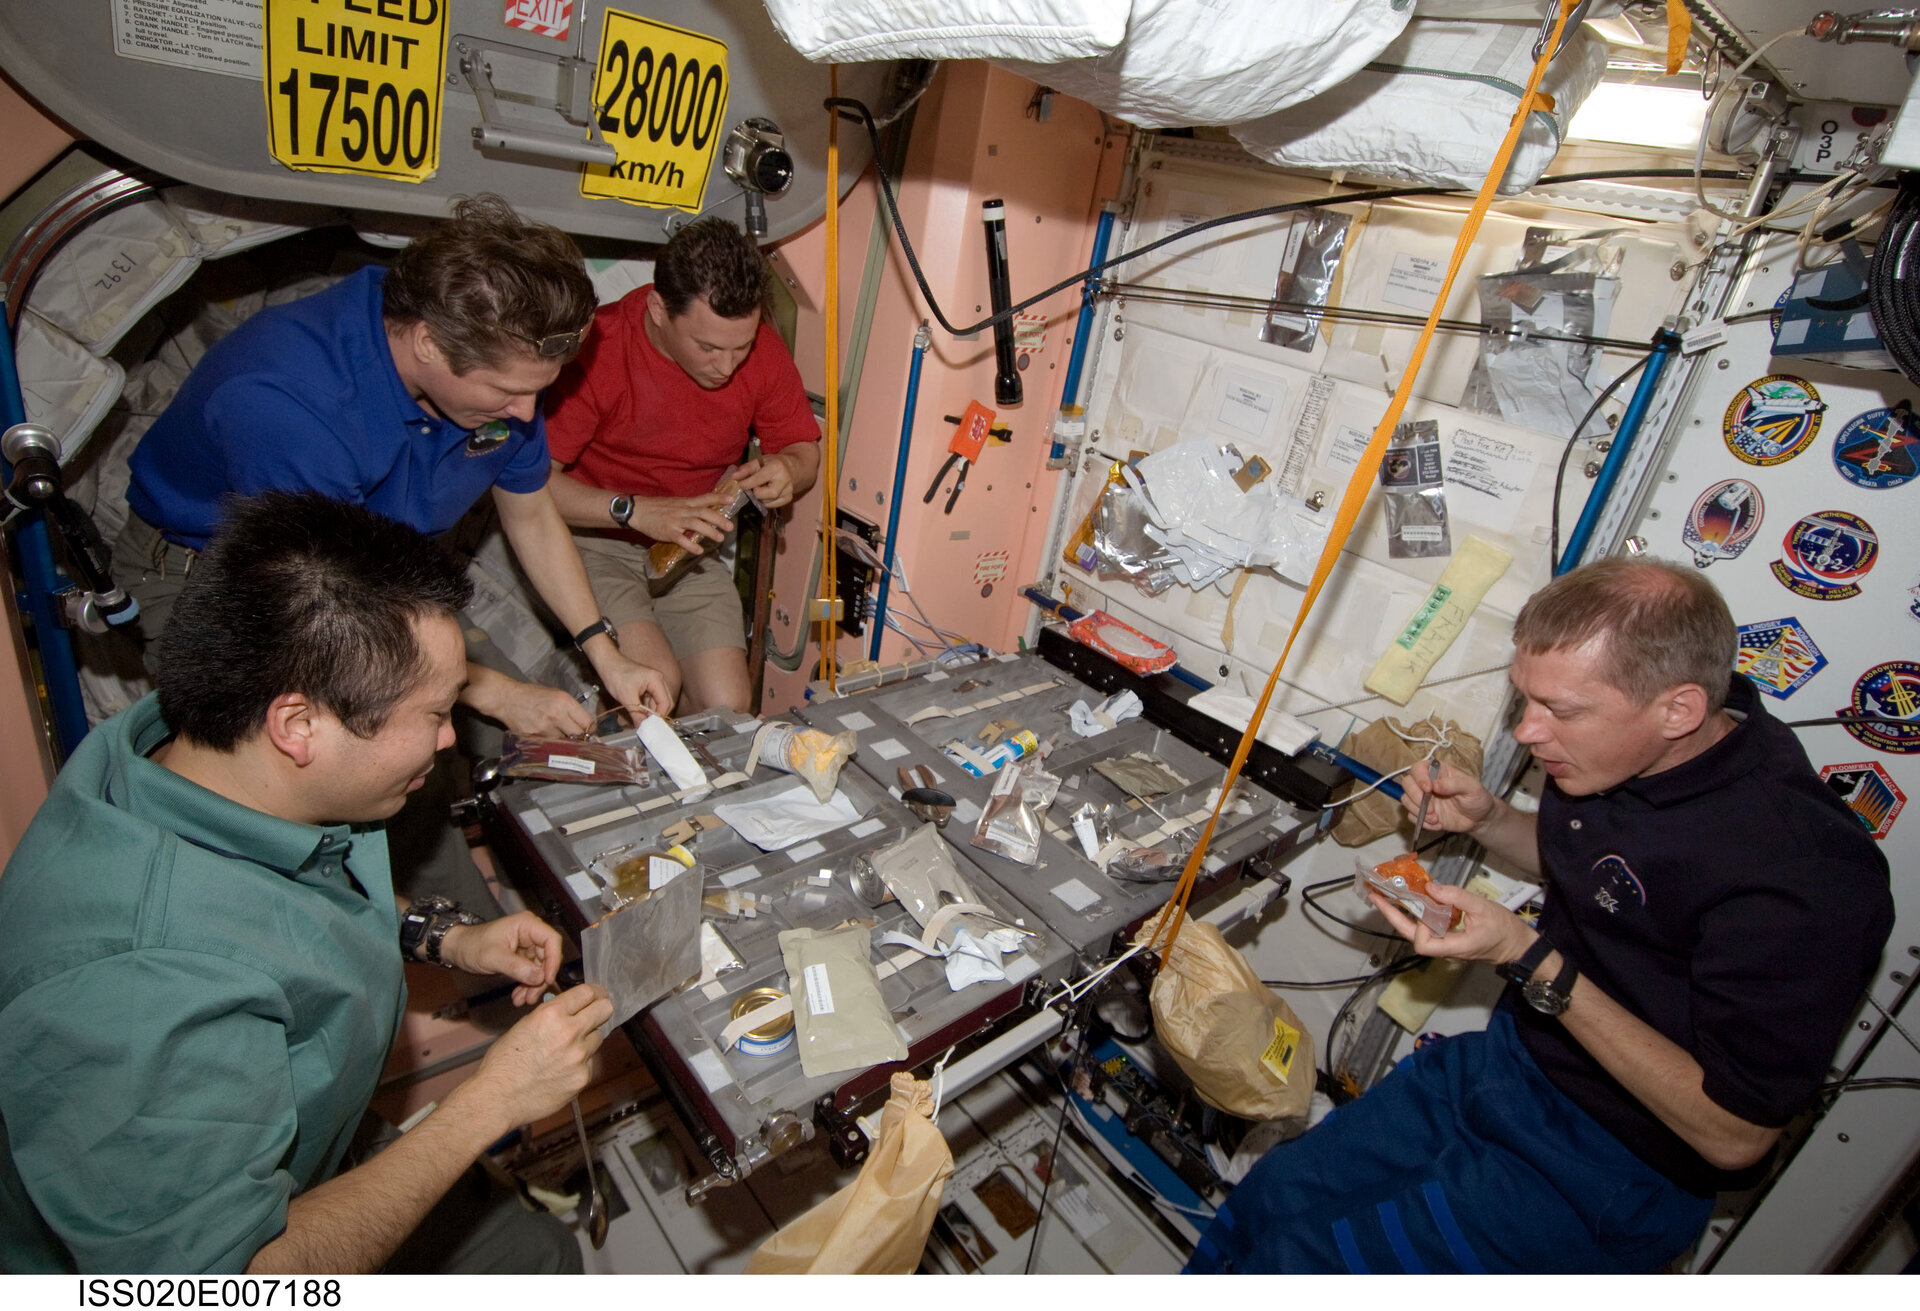 Expedition 20 crewmembers share a meal in the Unity module